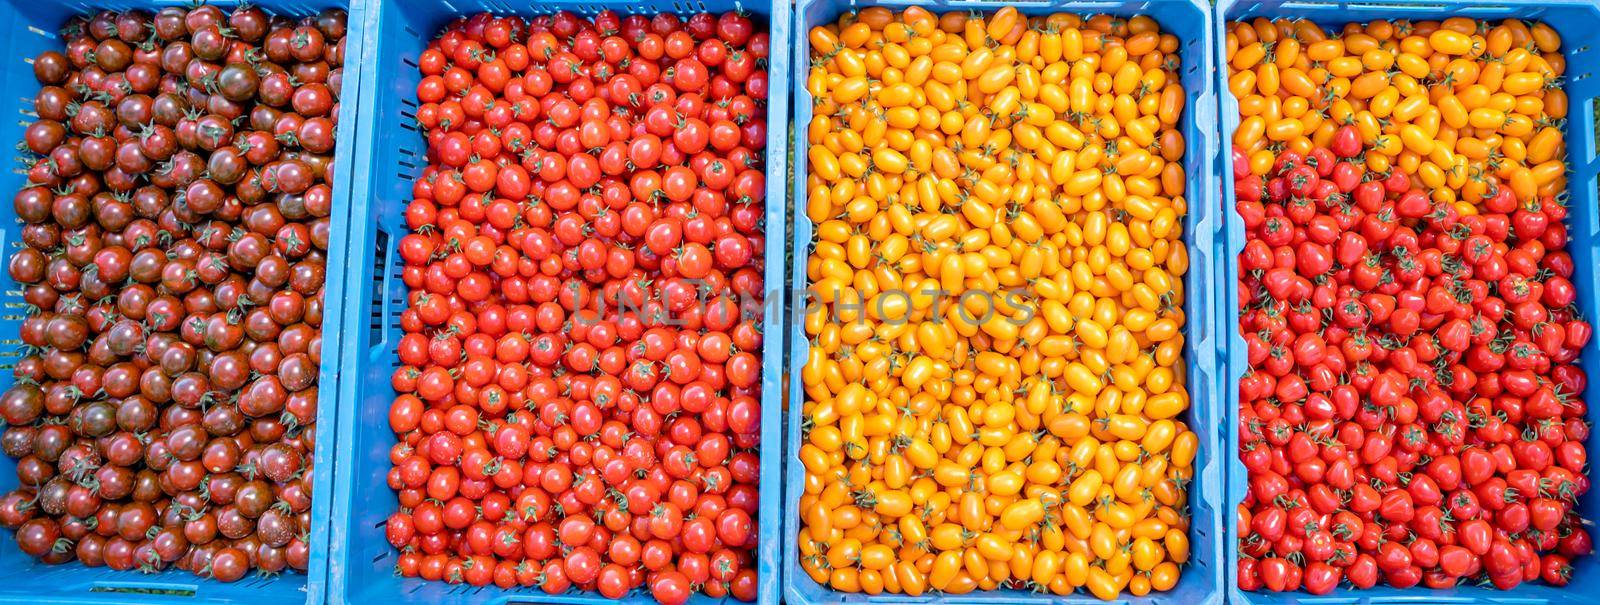 freshly picked yellow and red tomatoes in a crate.